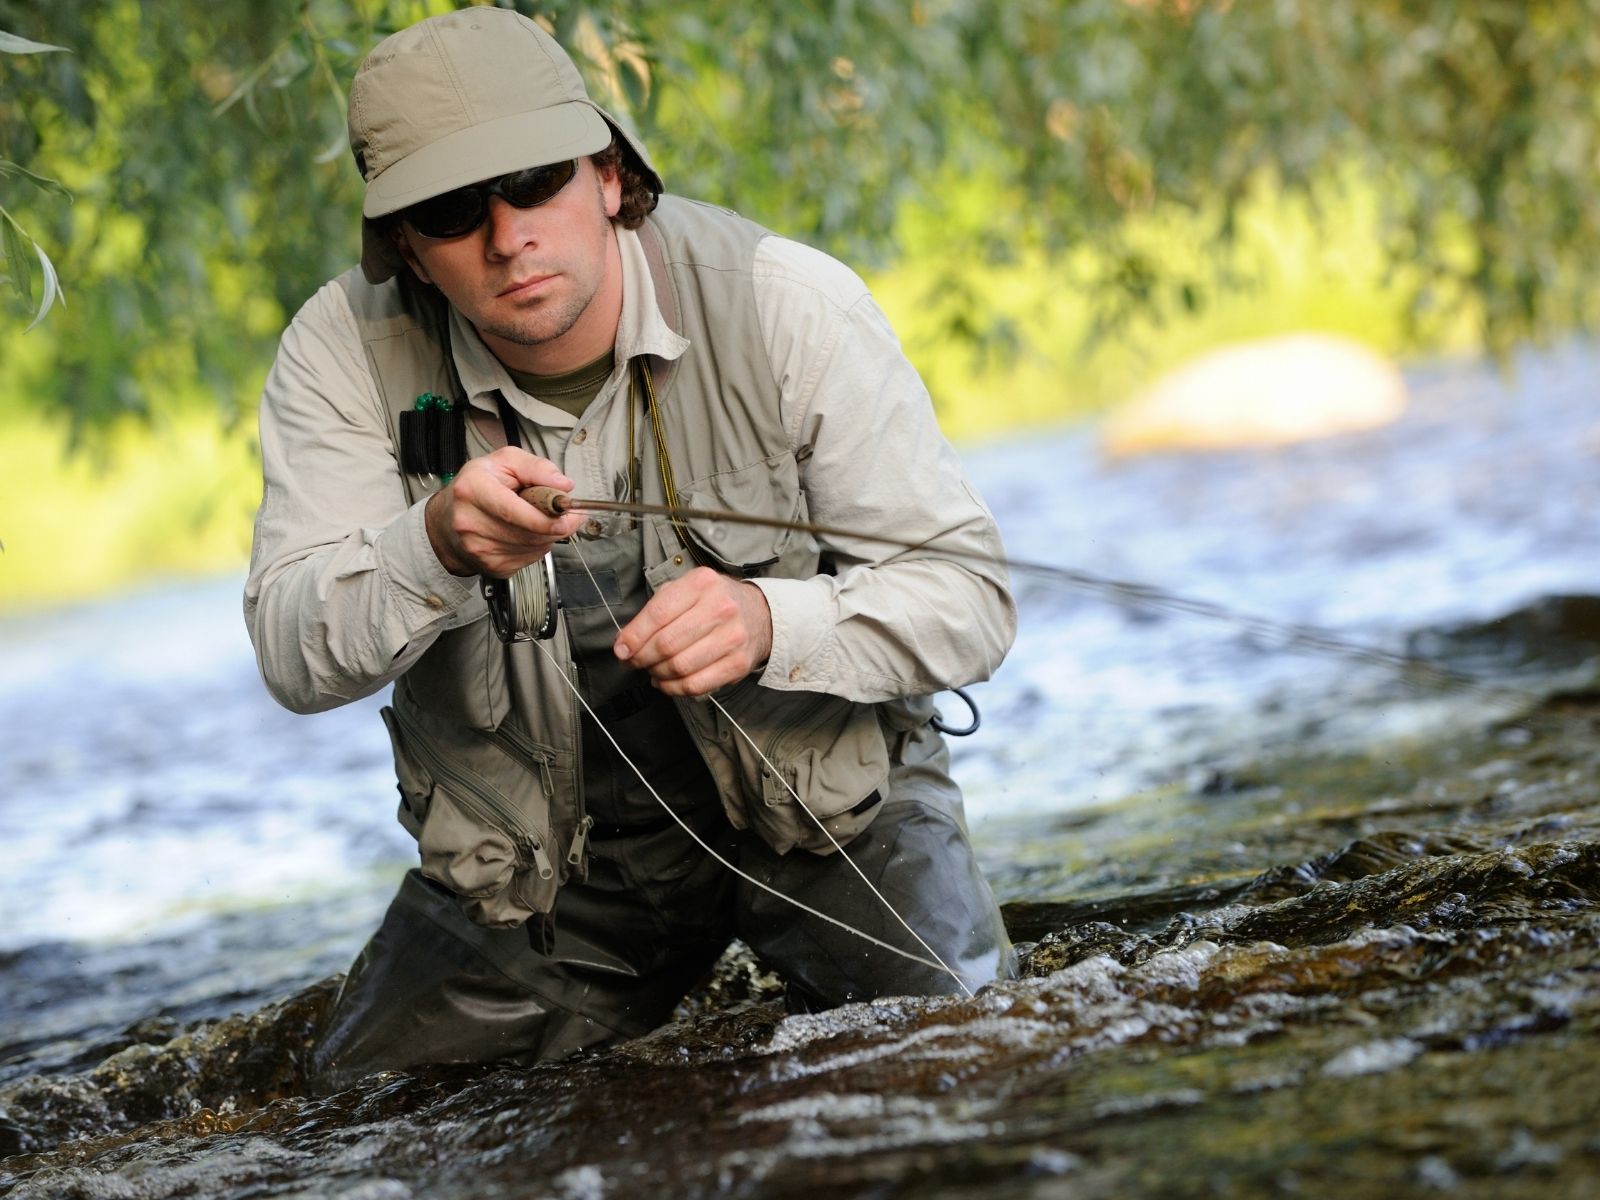 Fishing Hat Wearing Fly Fisherman casting a fly while wading in a stream